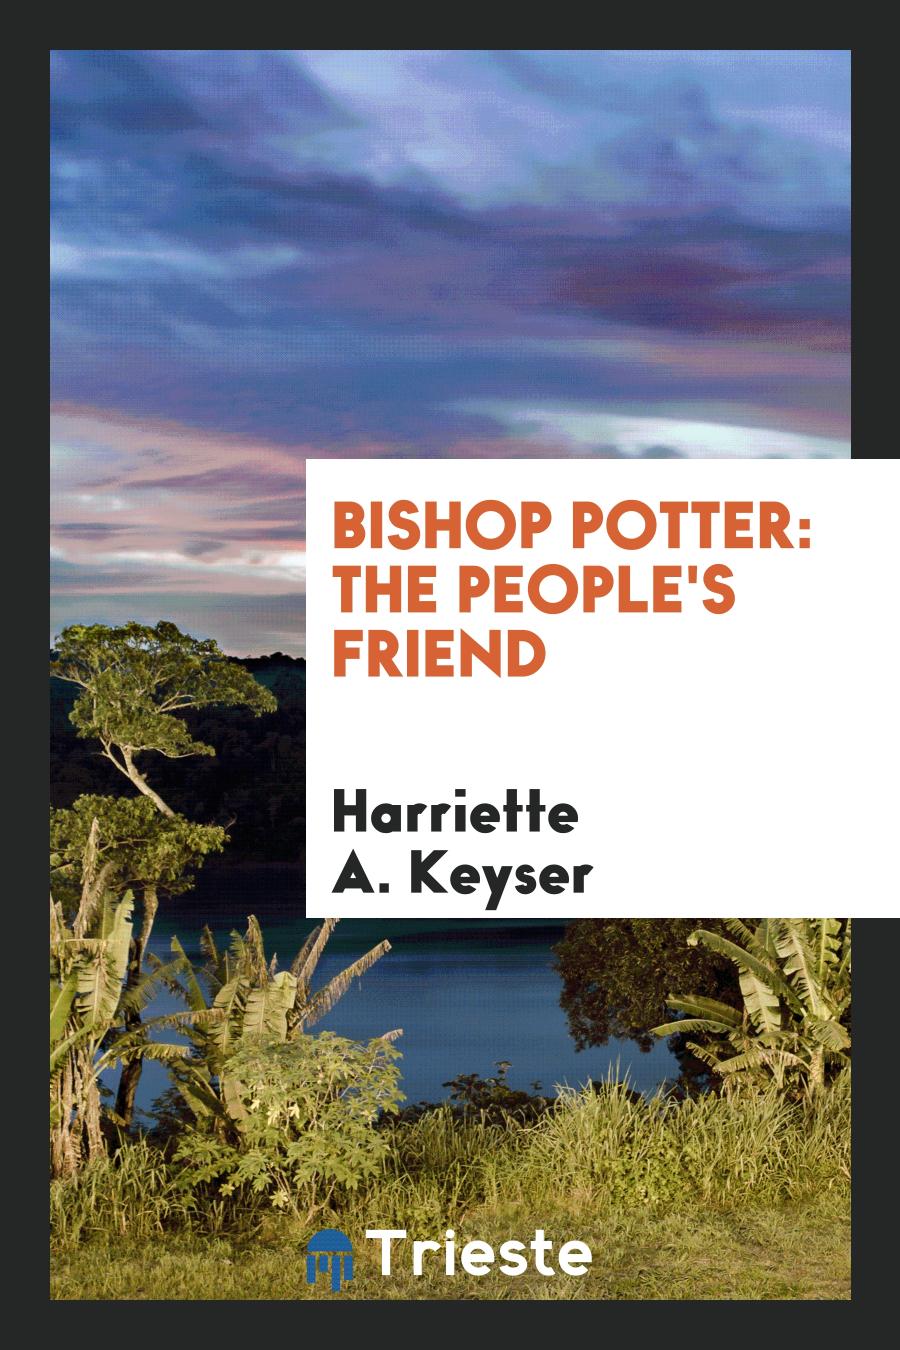 Bishop Potter: The People's Friend